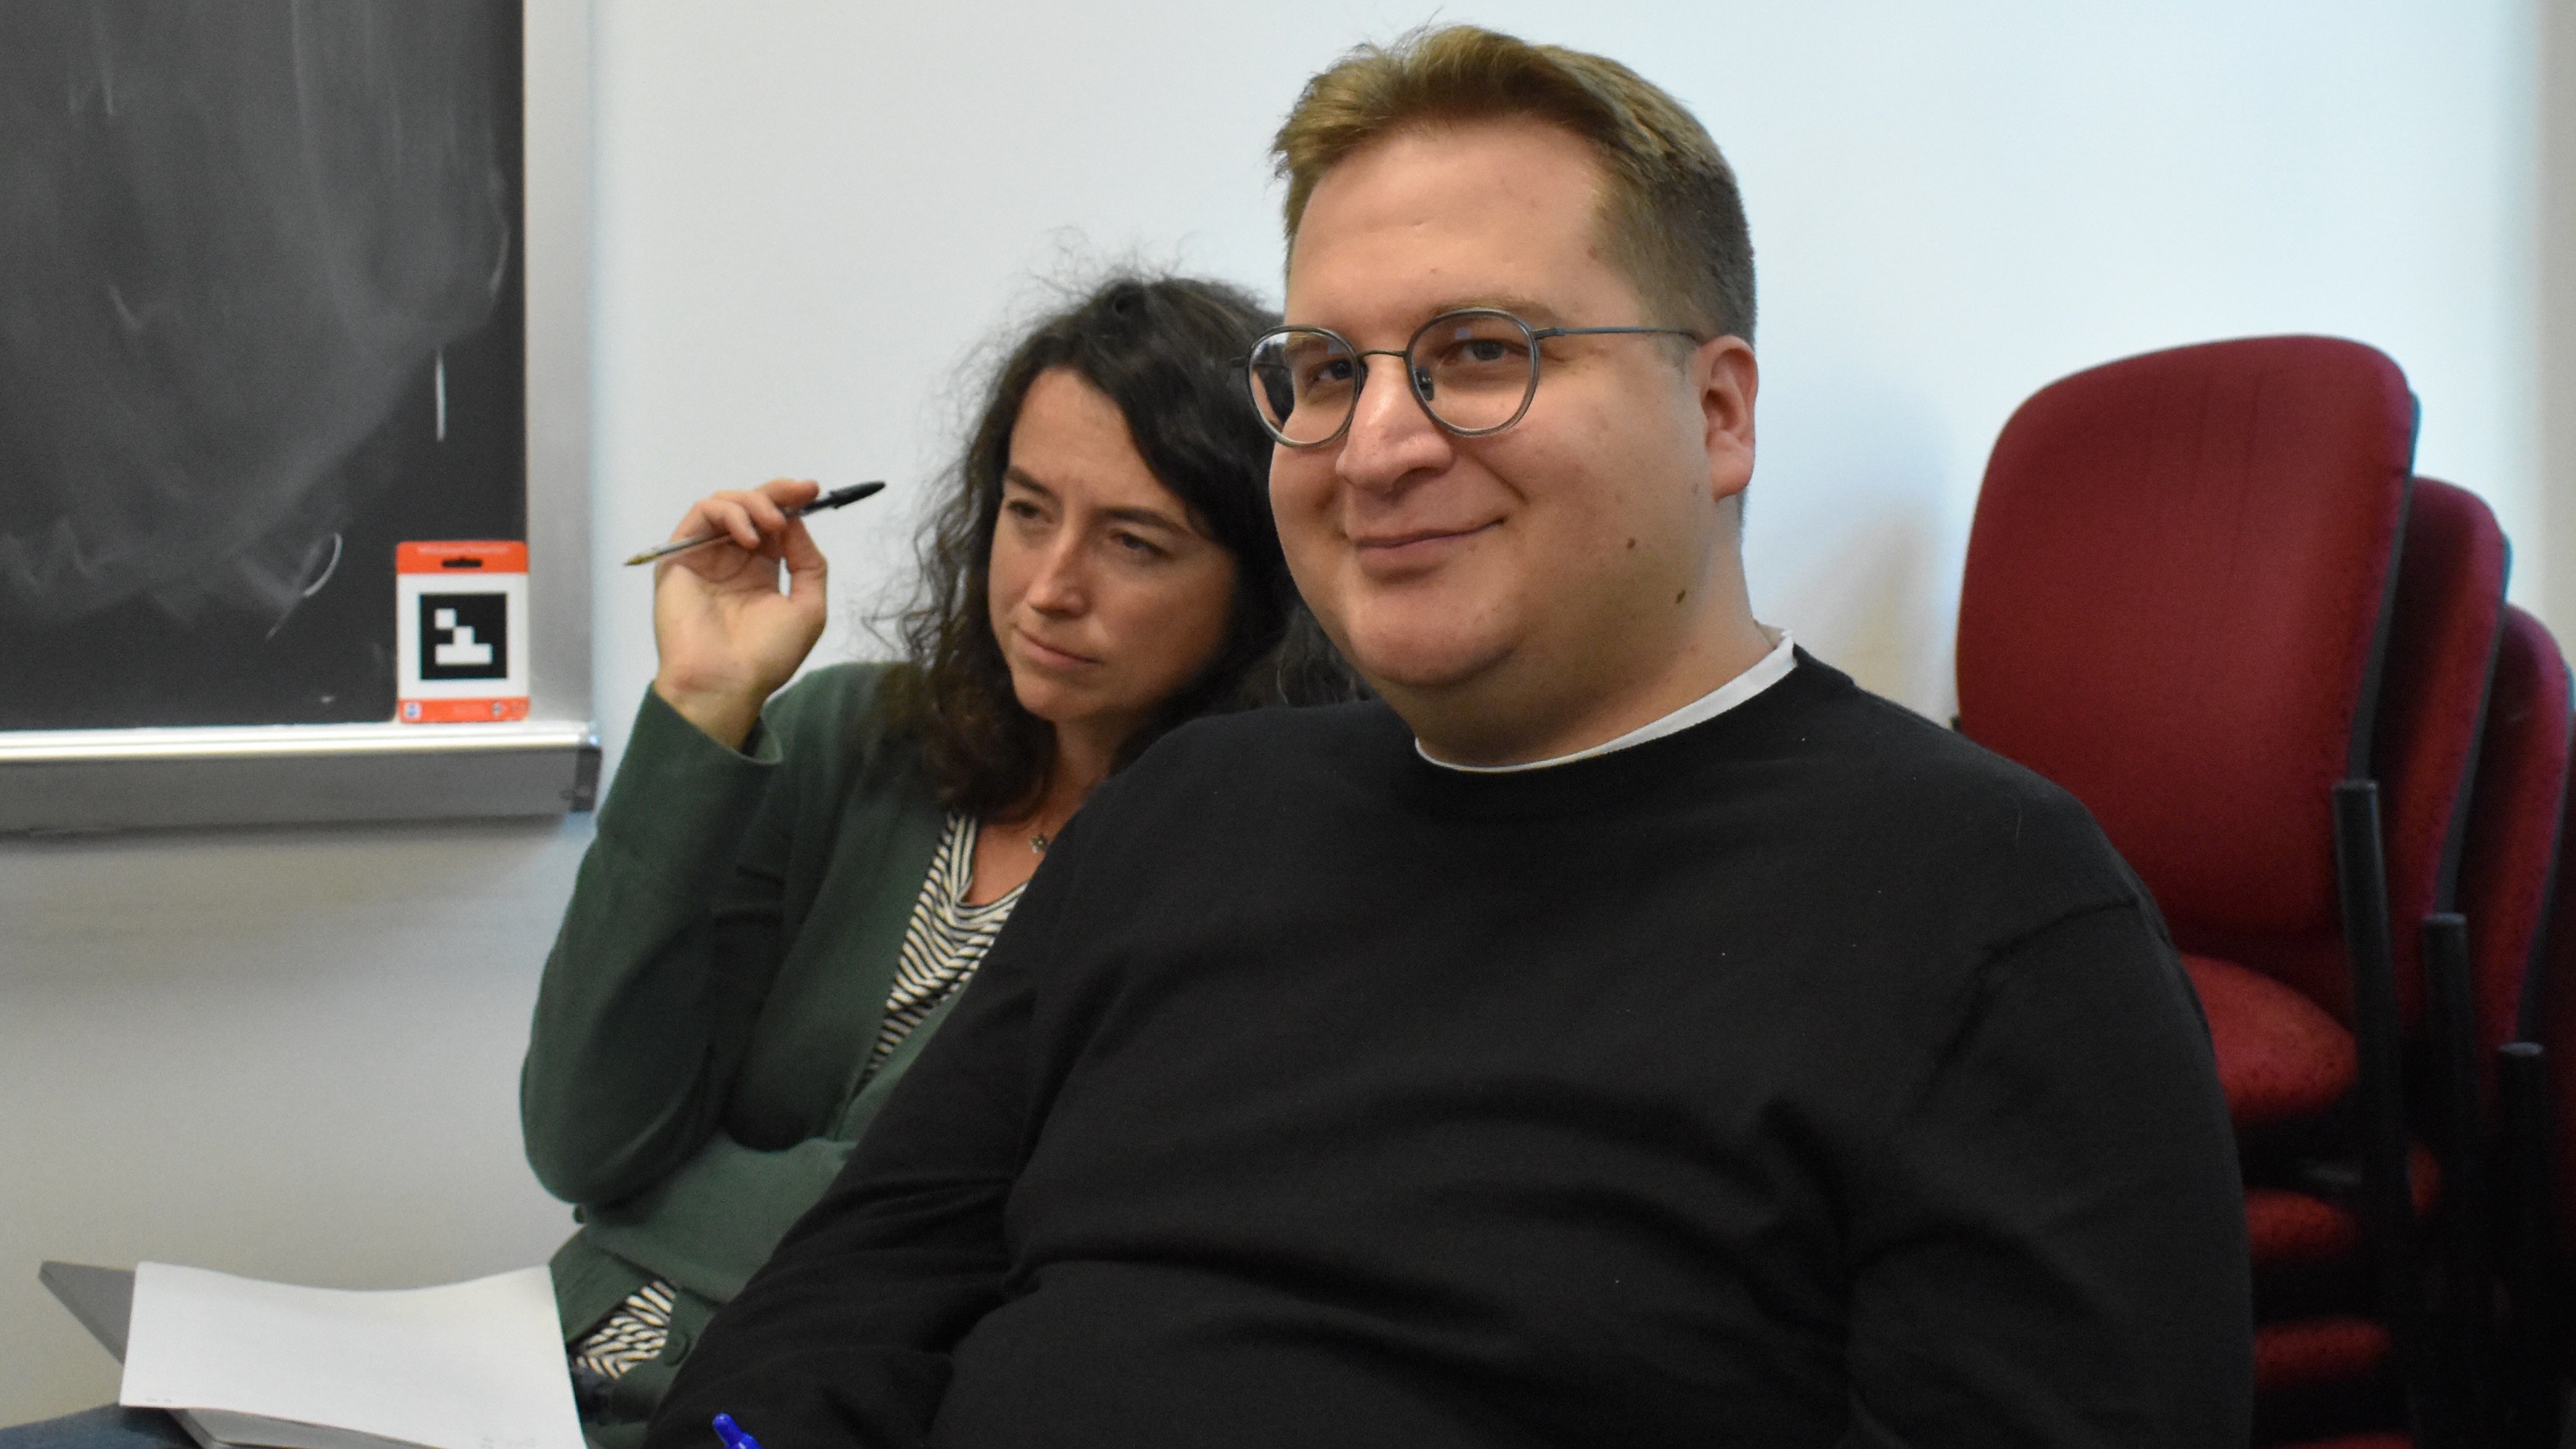 A young man with glasses, sitting in a classroom, with a woman behind him, looking thoughtful.